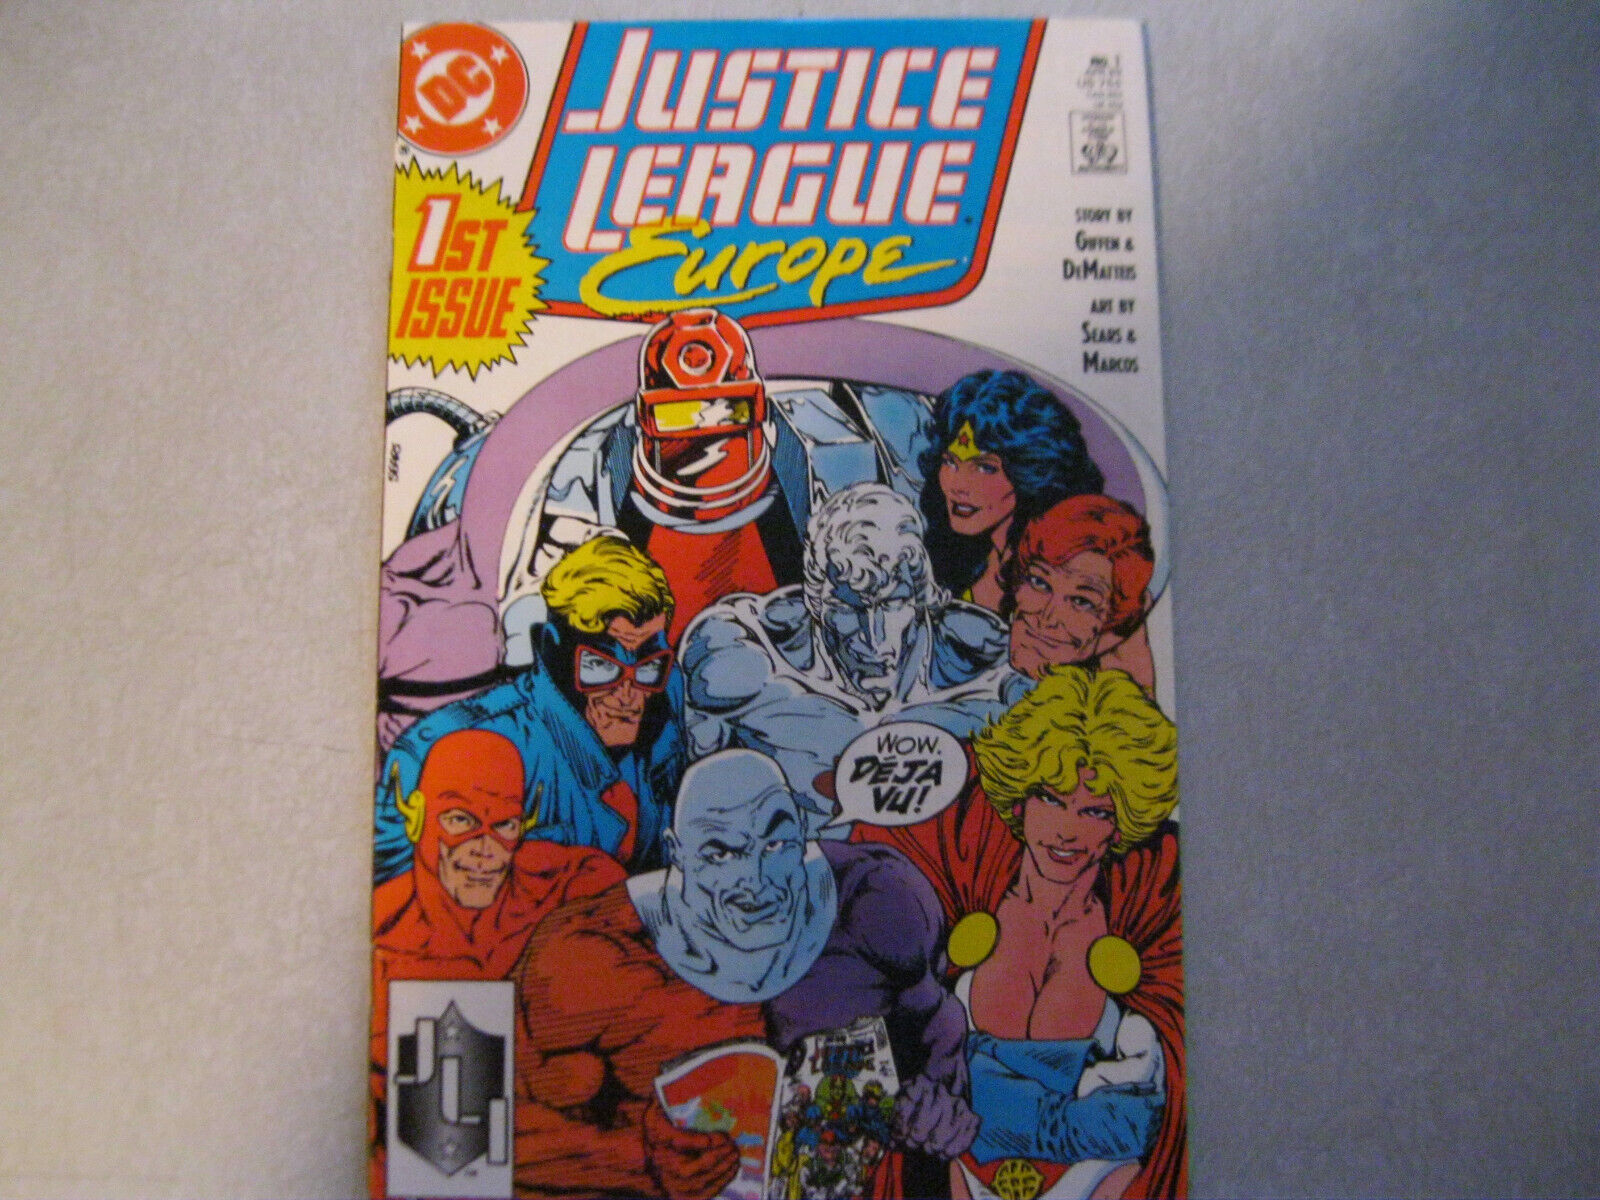 Justice League Europe #1 Written by KEITH GIFFEN & Artwork by BART SEARS